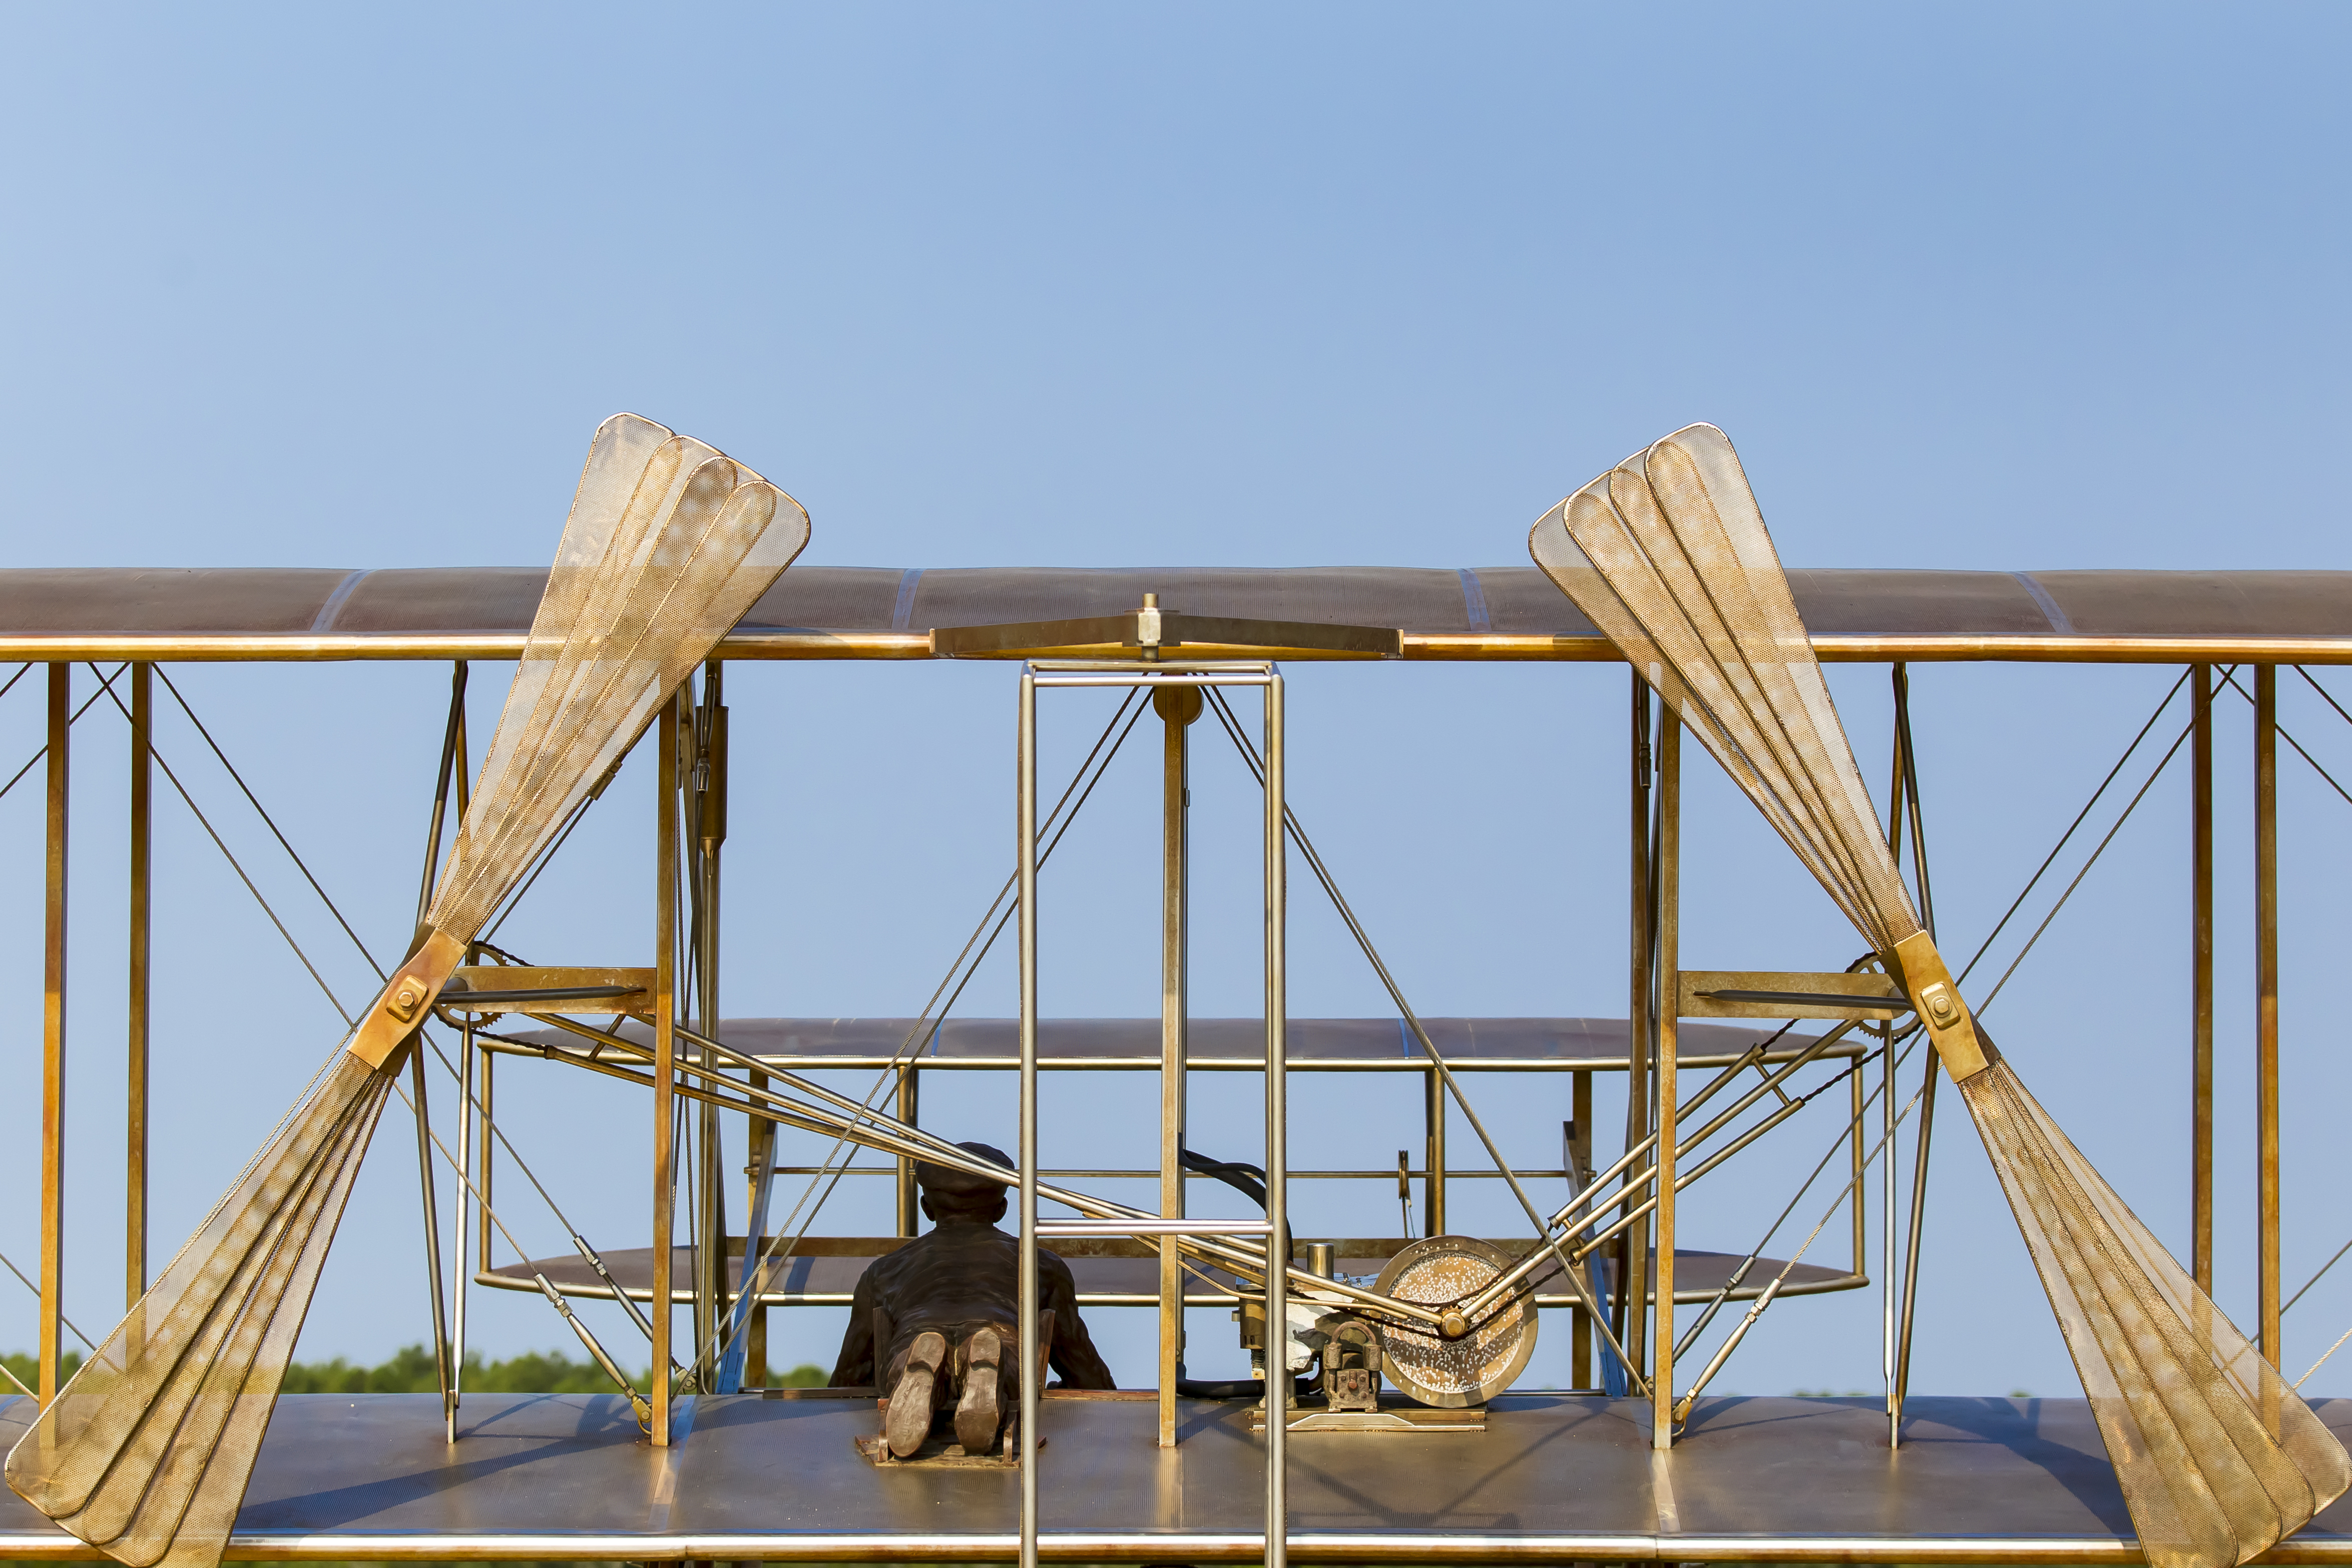 wright brothers - https://depositphotos.com/64468005/stock-photo-wright-brothers-national-memorial.html